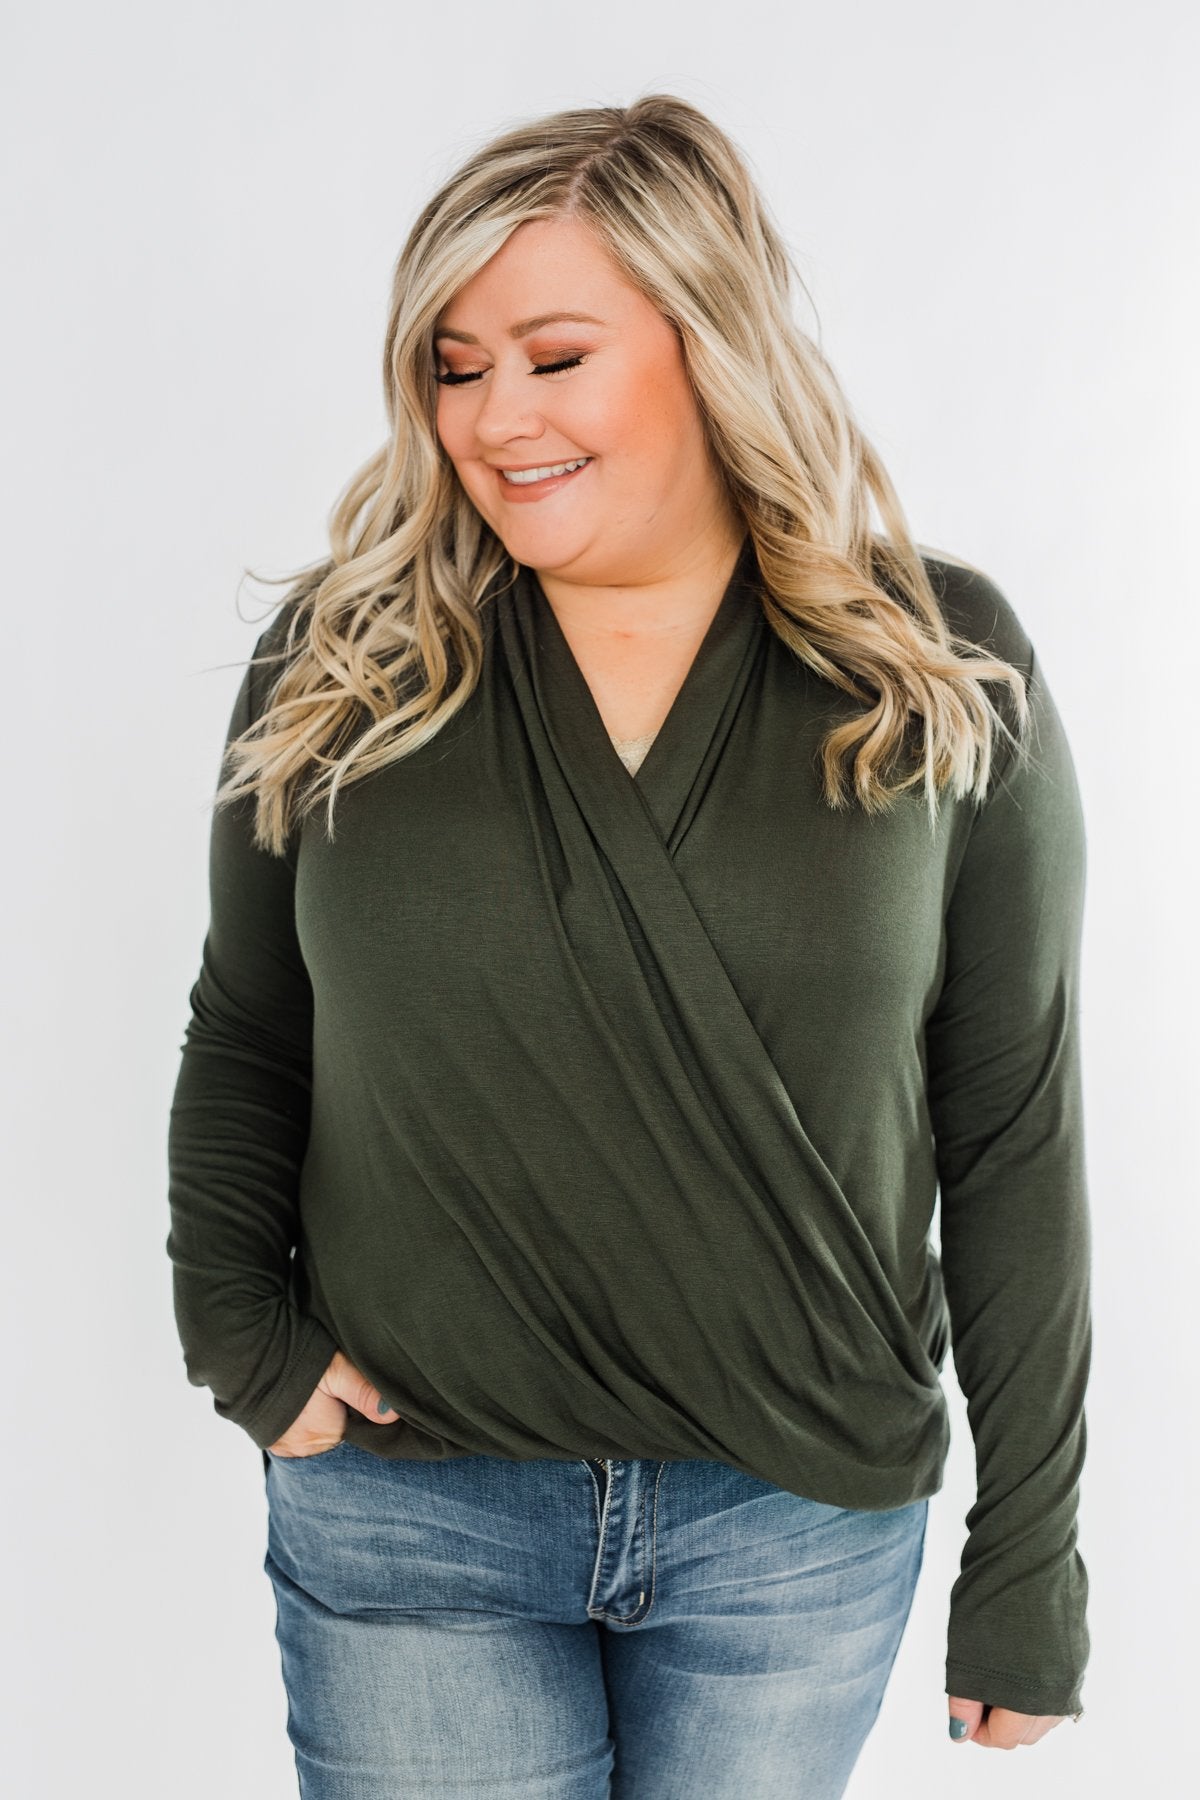 Can't Help This Feeling Front Wrap Top- Olive